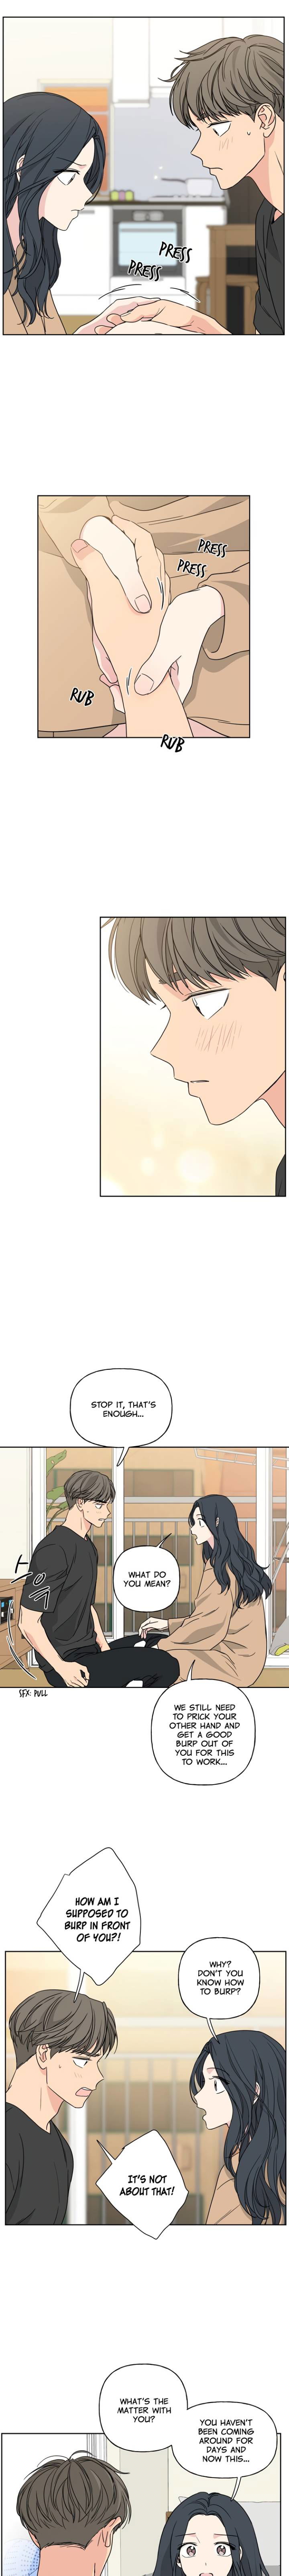 mother-im-sorry-chap-27-4